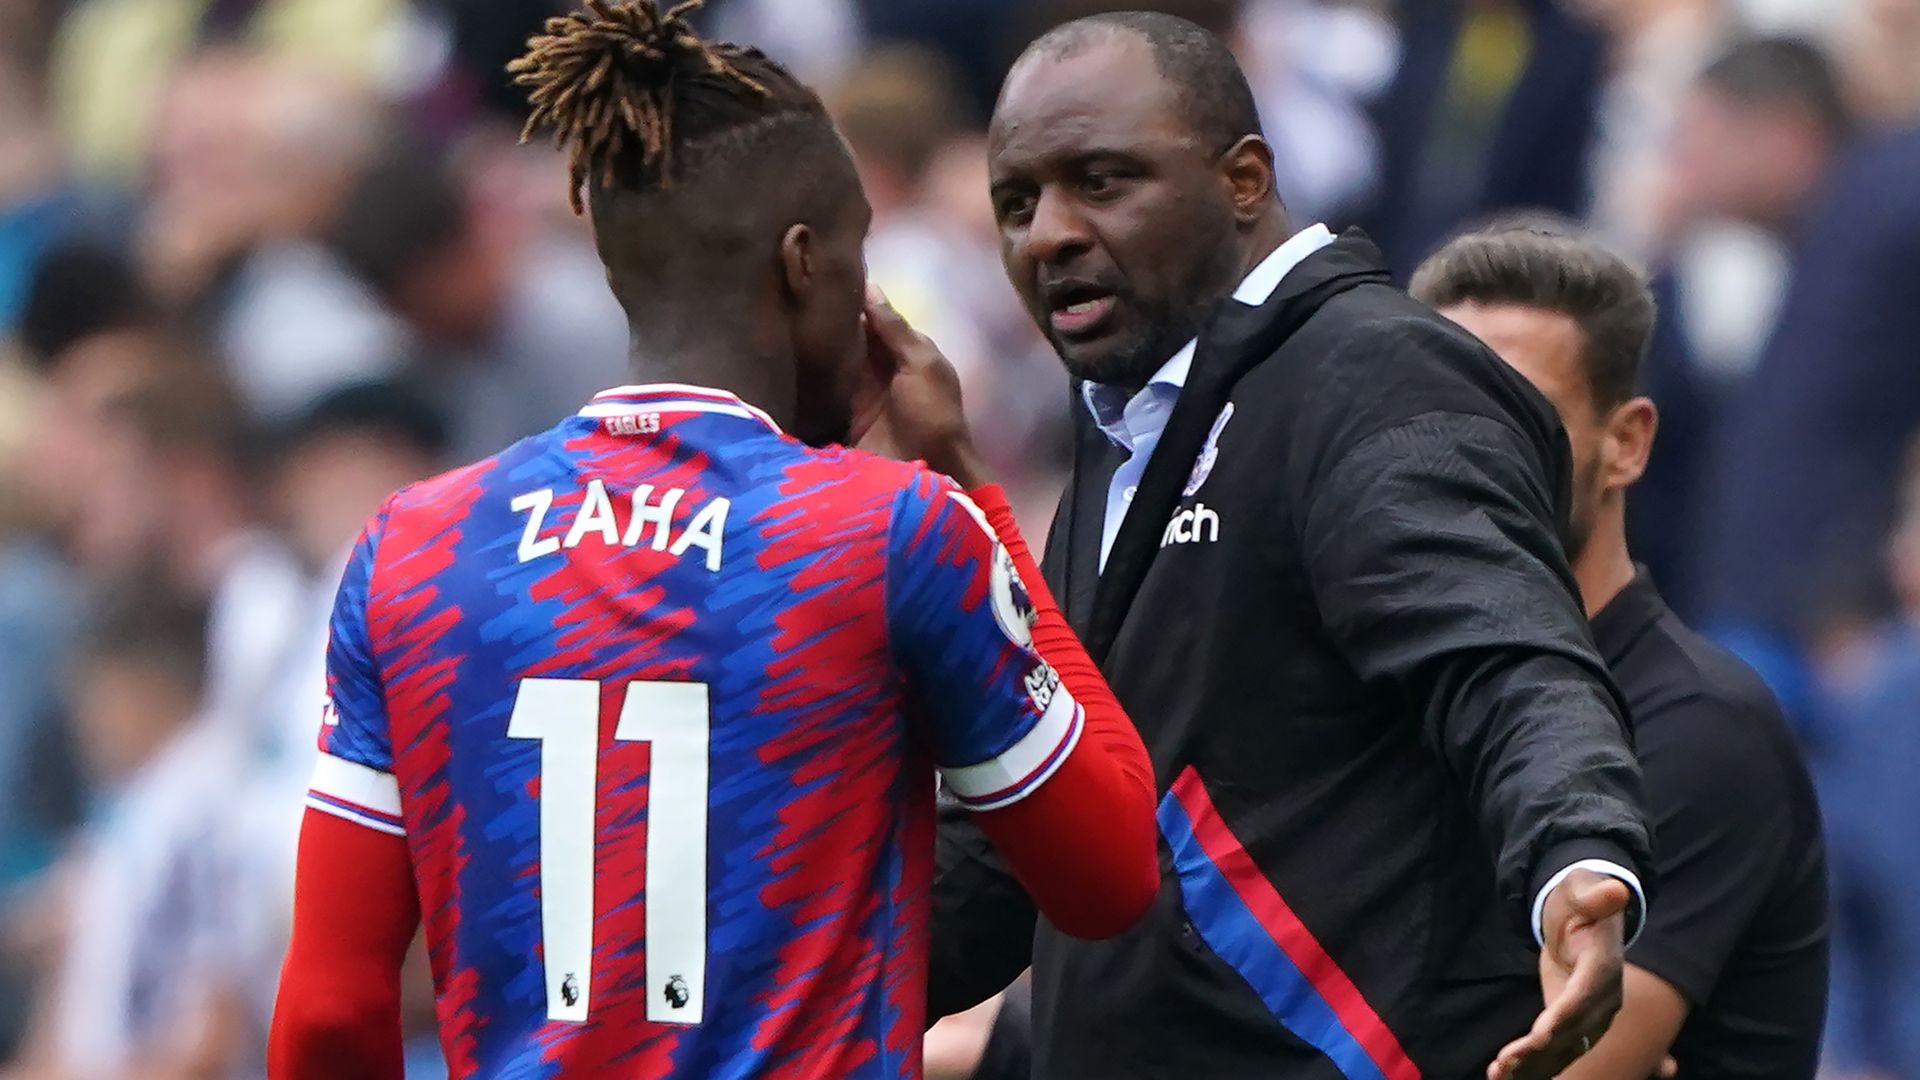 Vieira calls for 'time' amid winless run | 'Zaha's future in his hands'